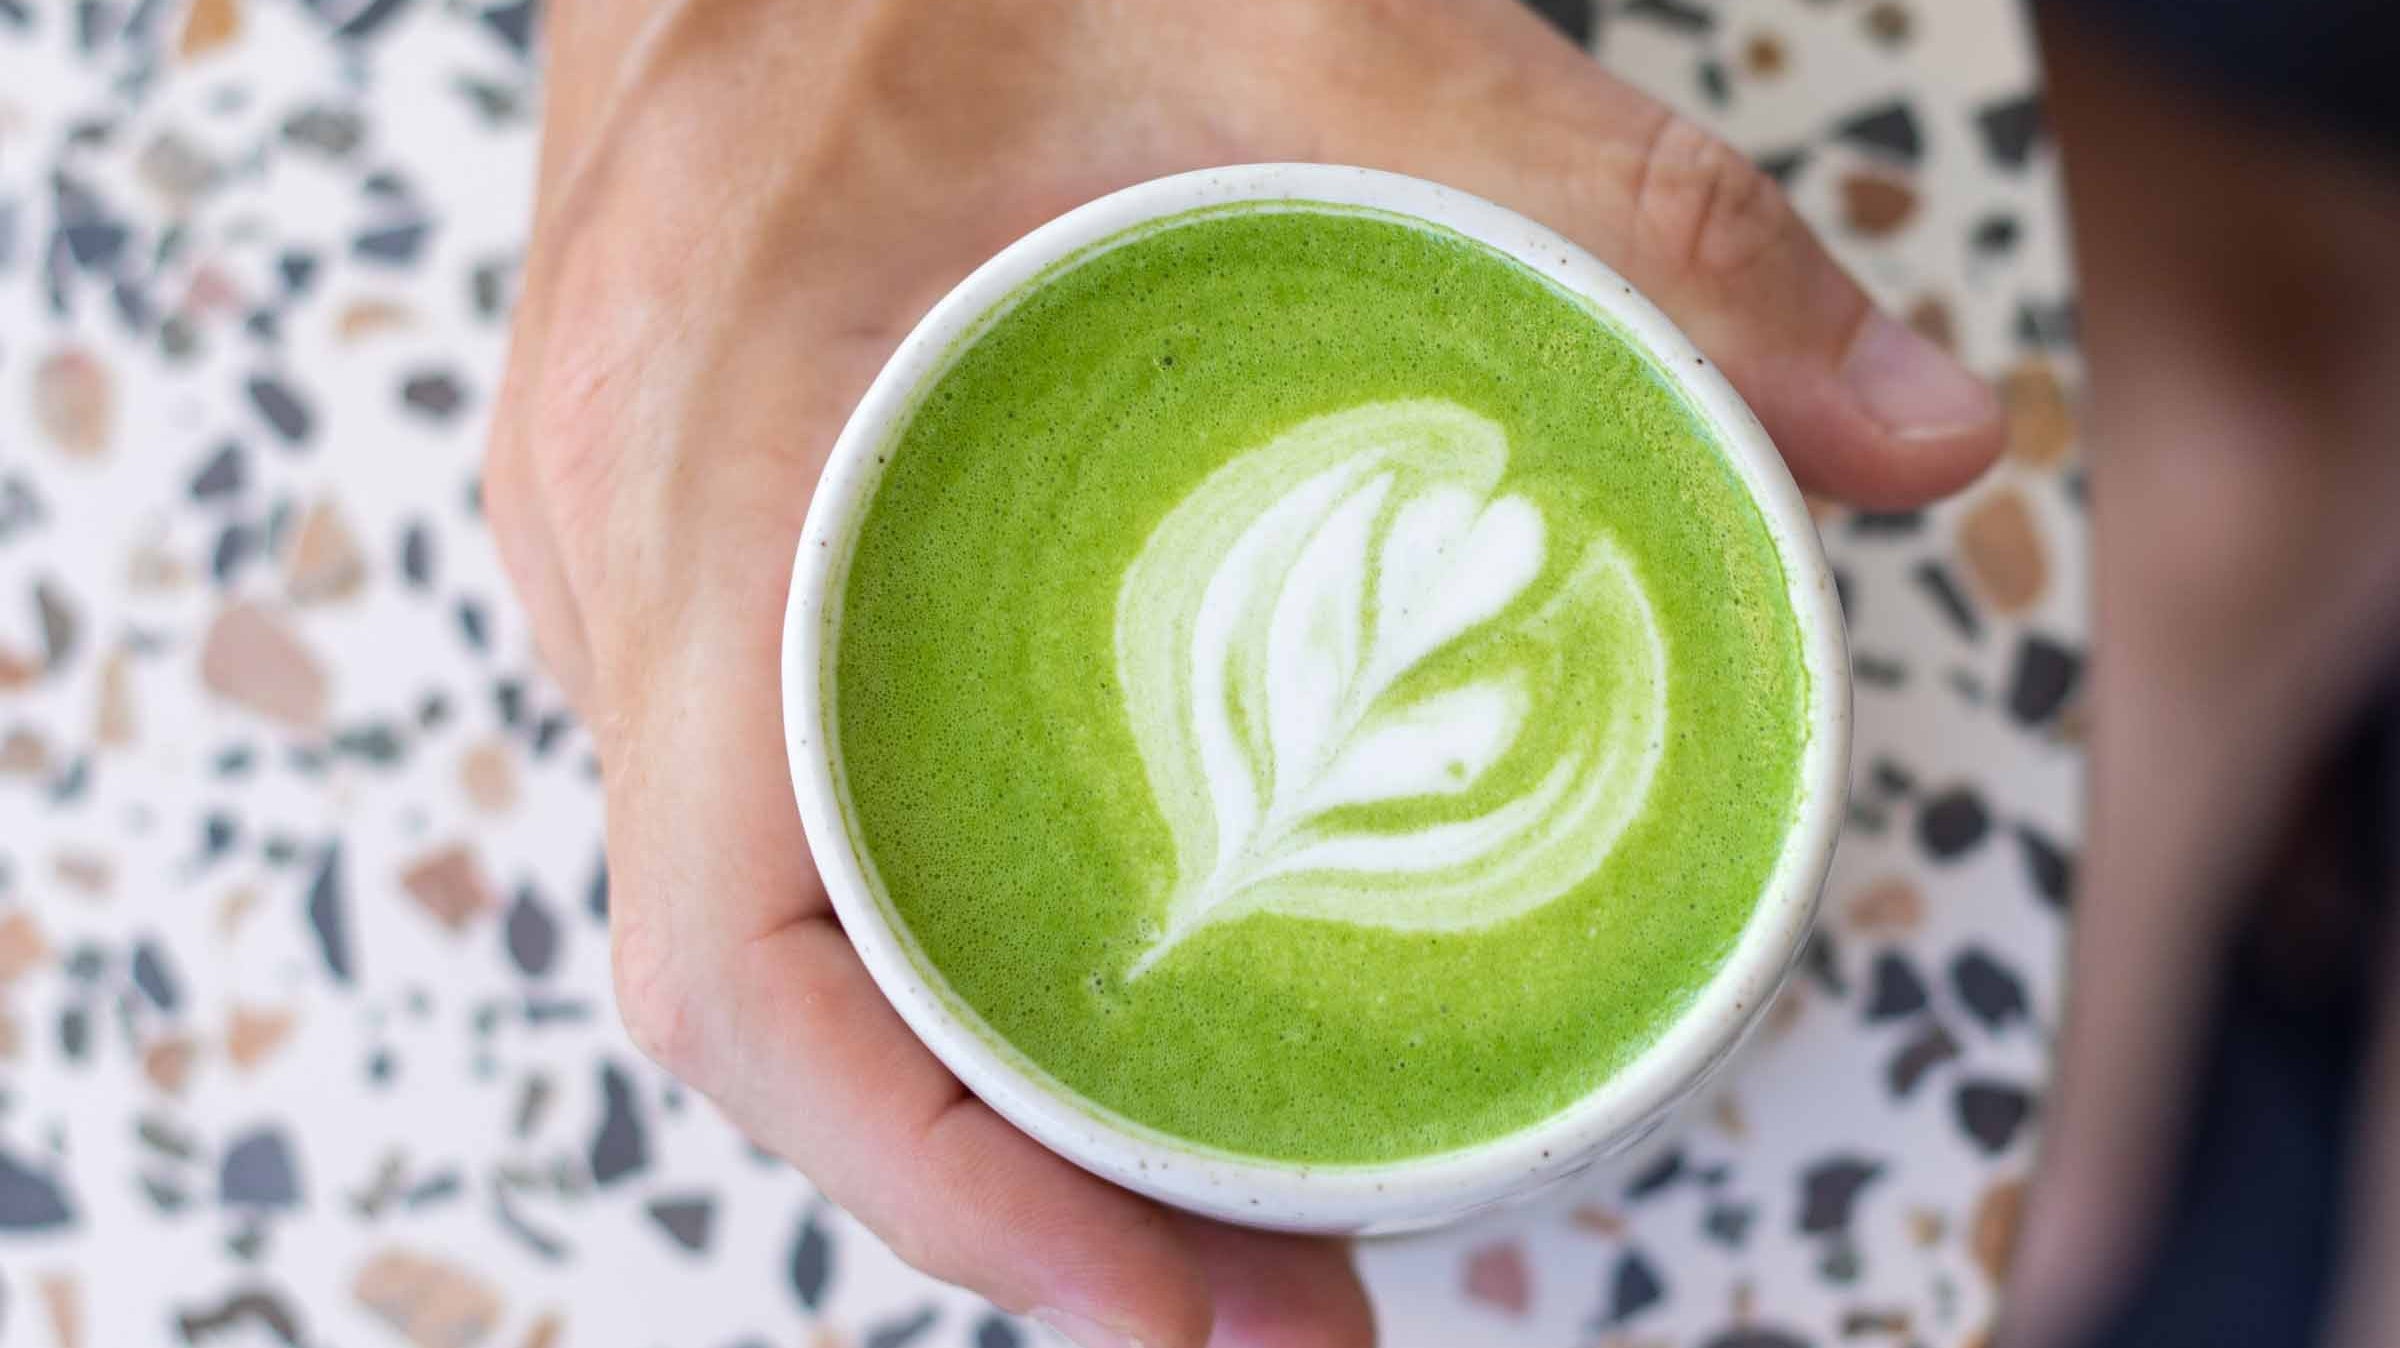 How to prepare Matcha Latte at home